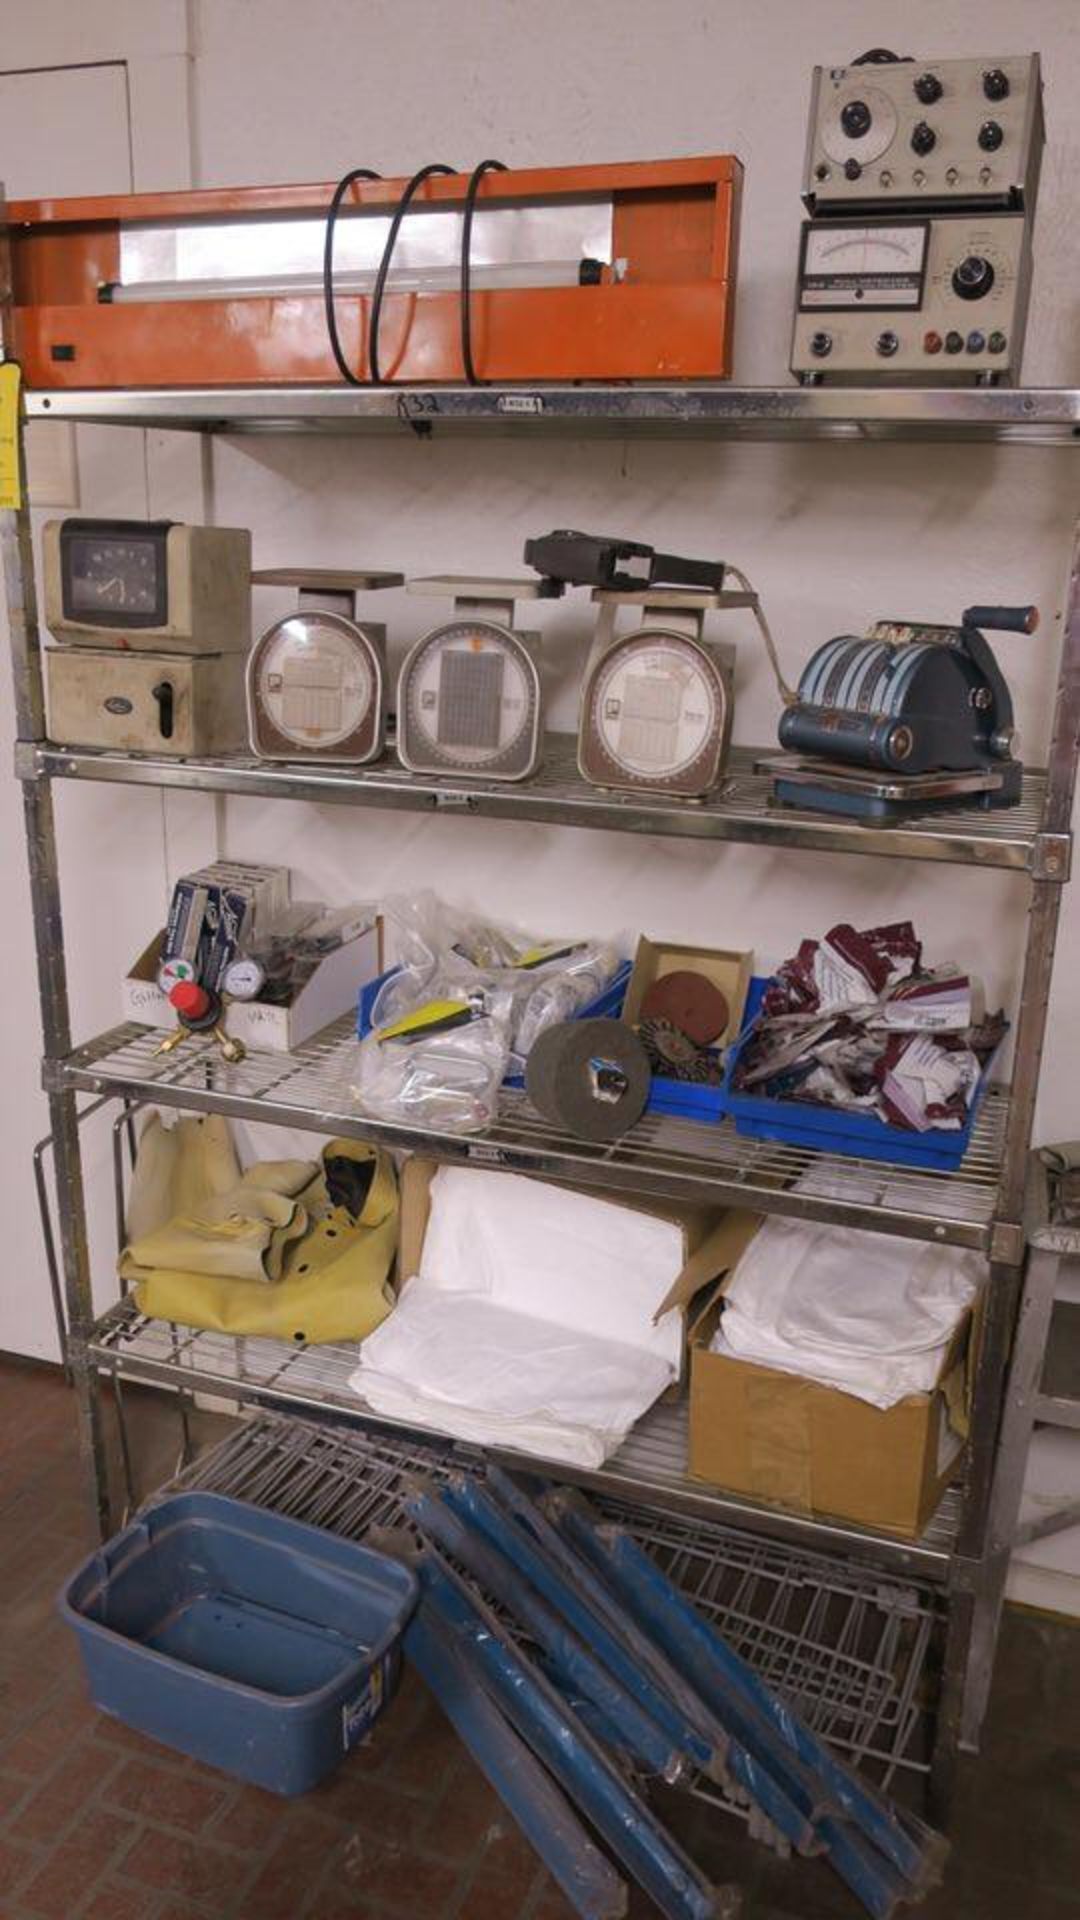 LOT of Tyvec Suits, Scales, Misc. Other Items + Wire 4-Shelf Stainless Steel Storage Unit